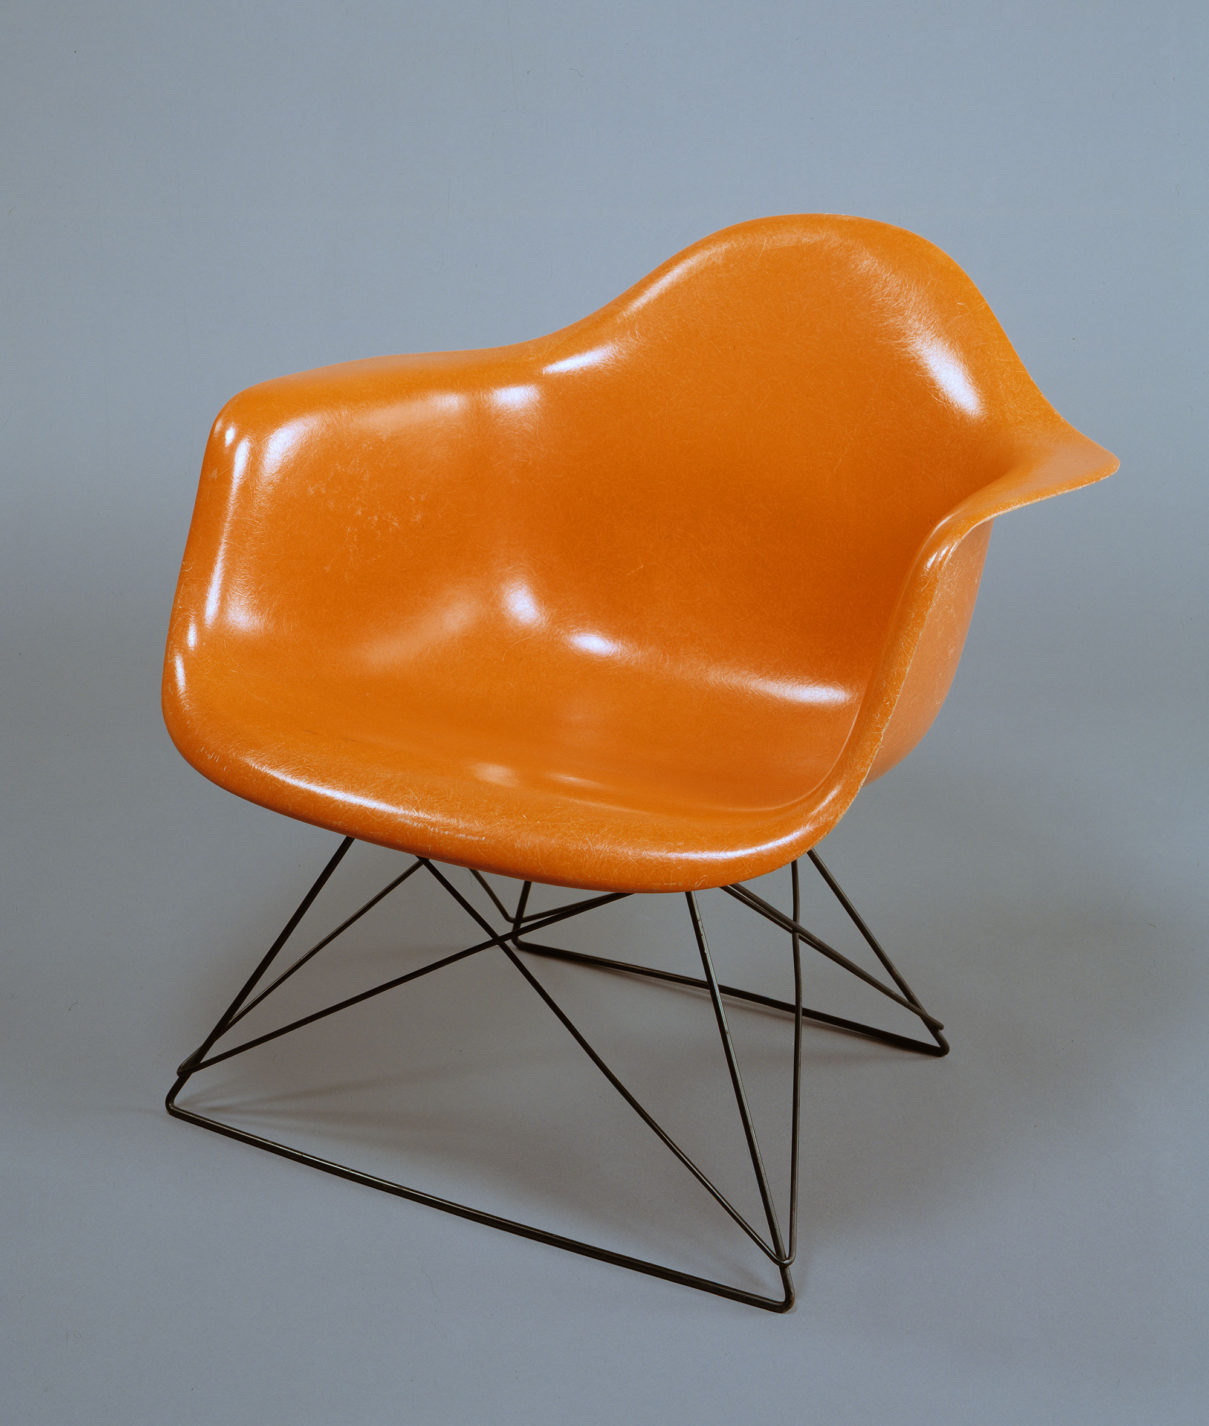 Large molded shell armchair in orange fiberglass with a crisscrossing base of black wire.